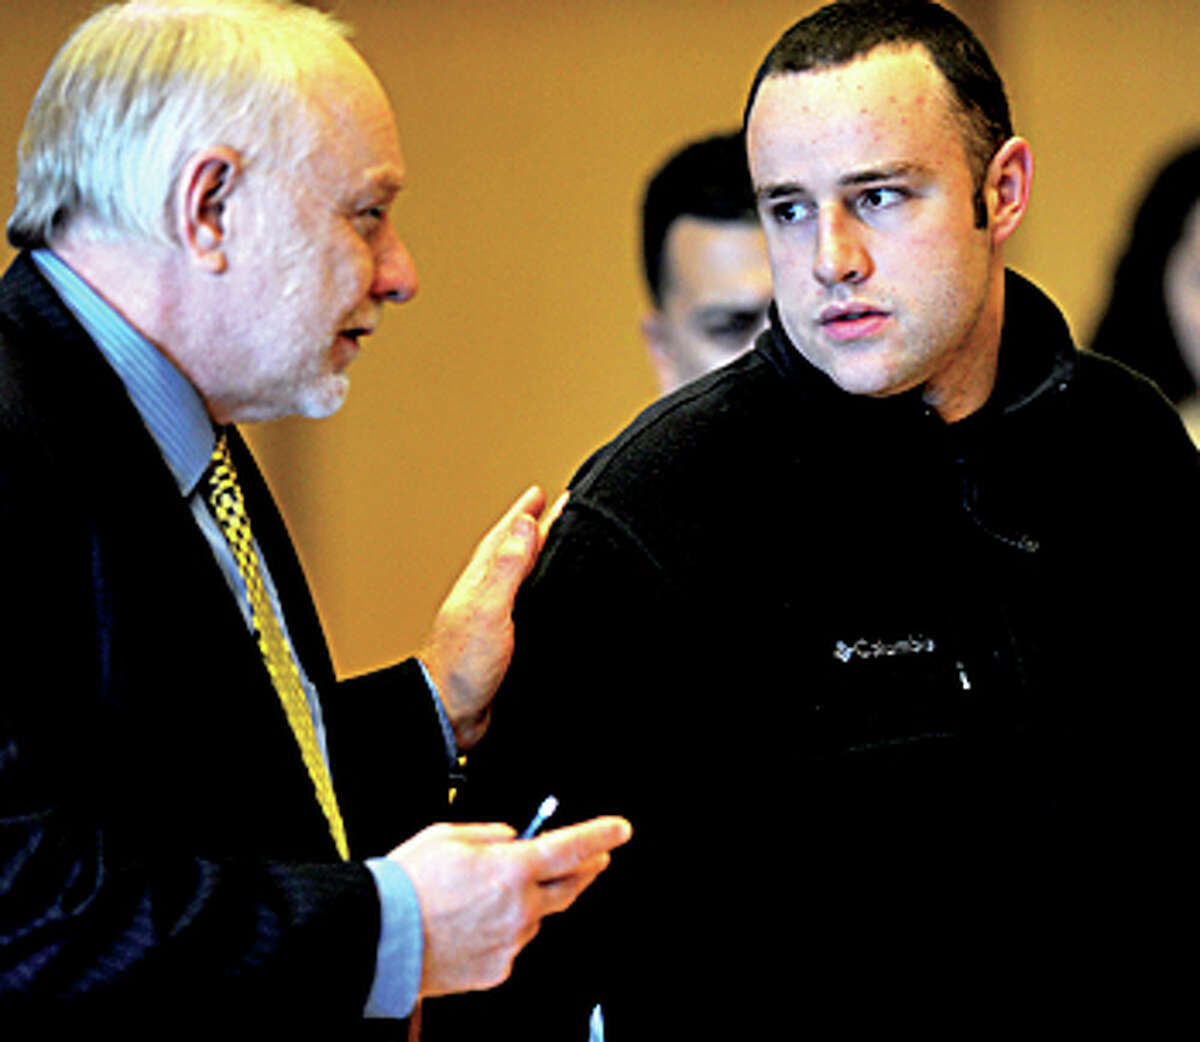 Aaron Ramsey of Wilton, right, sits beside his lawyer, Howard Ehring, left, as Ramsey is found not guilty by reason of mental disease or deficiency by a three-judge panel during a verdict reading at state Superior Court in Stamford on Wednesday, December 12, 2012. Ramsey was on trial for beating his father, Edward, to death in May after Ramsey allegedly heard voices.